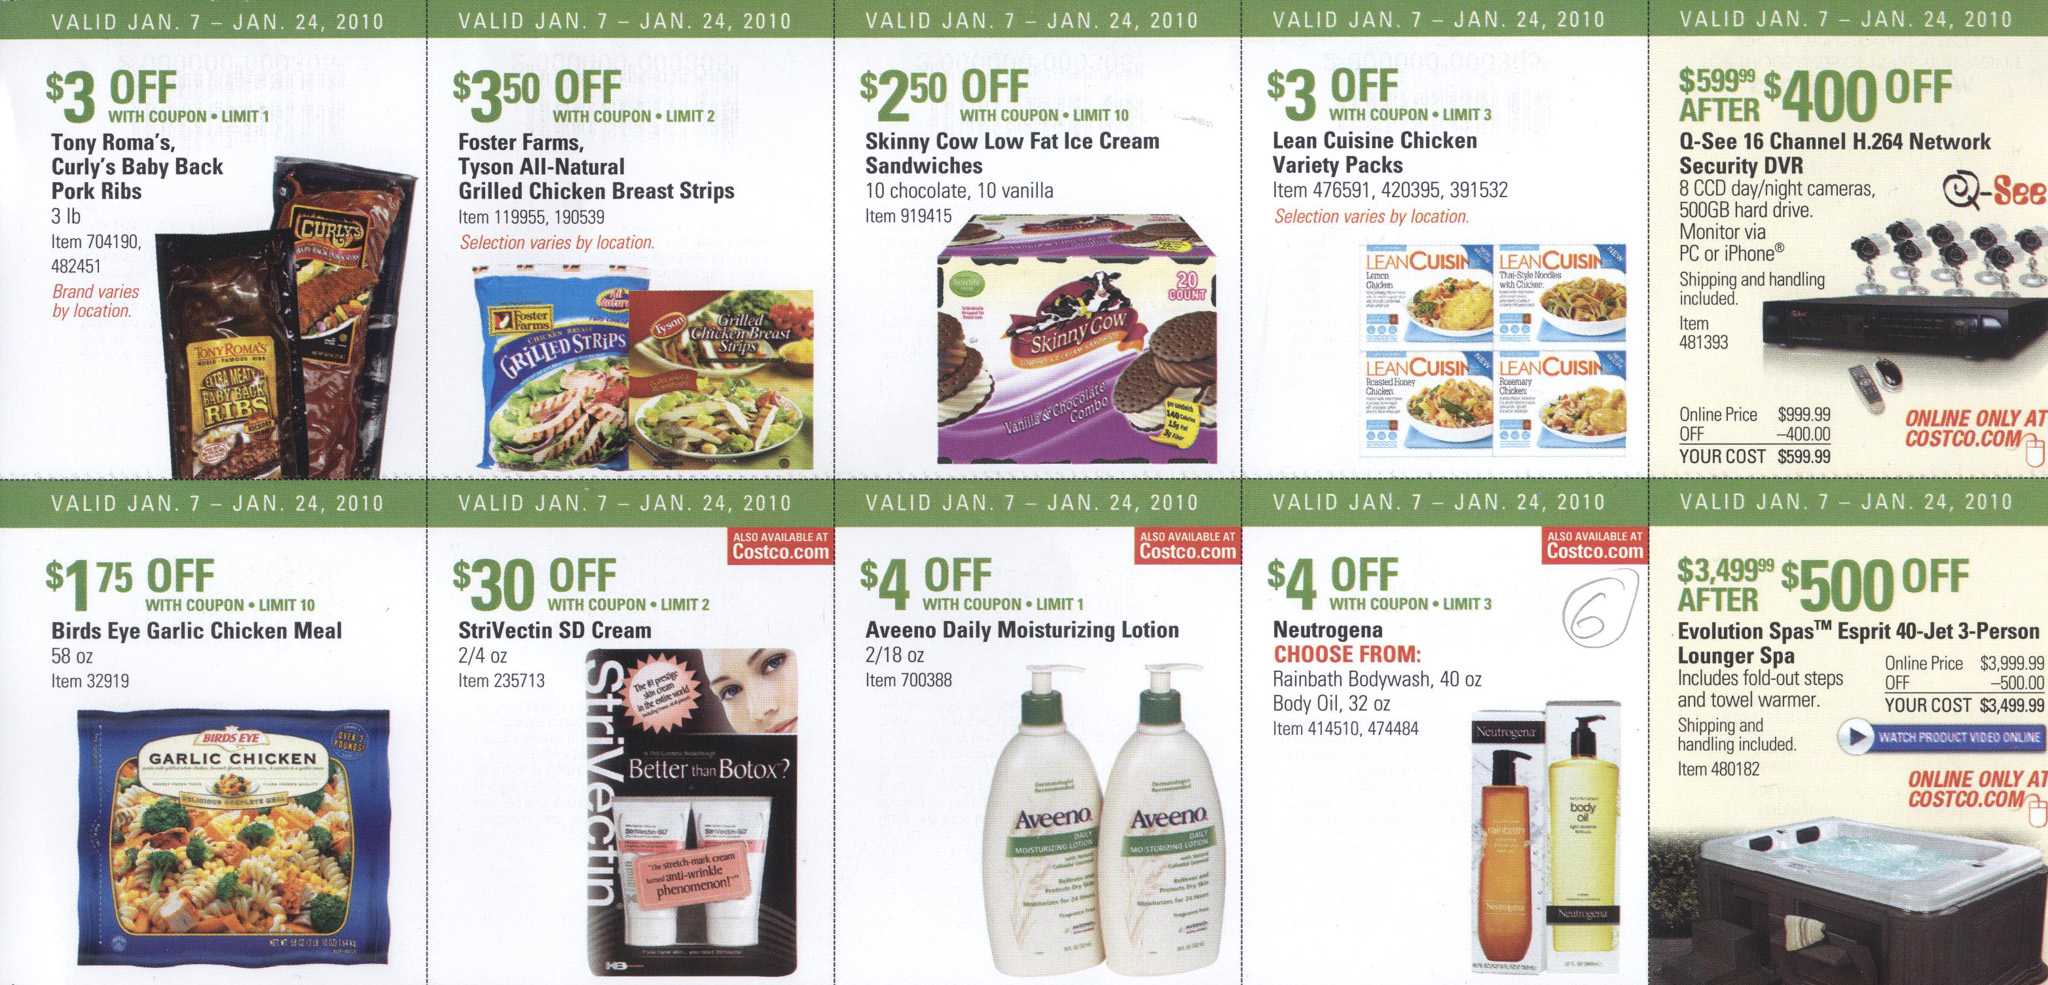 Coupon book page 6 in full-size.